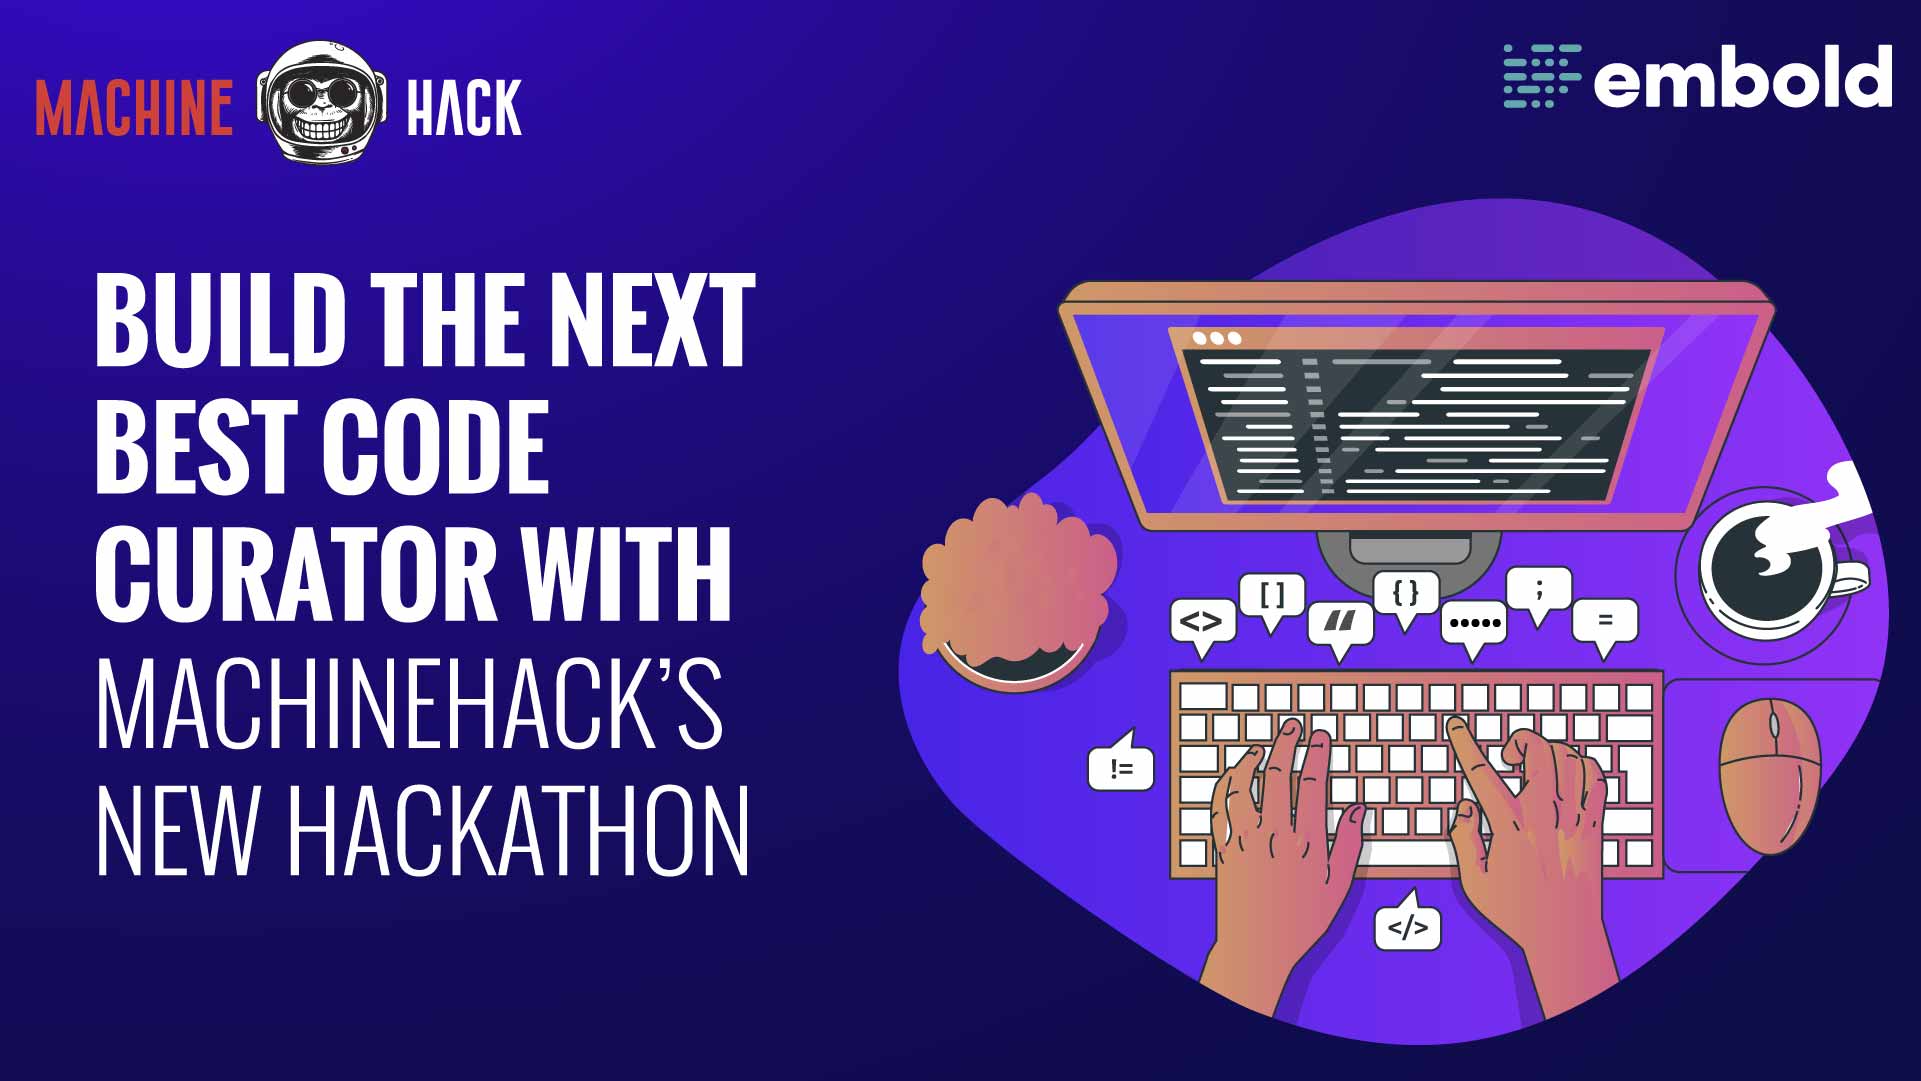 Build The Next Best Code Curator With MachineHack’s New Hackathon